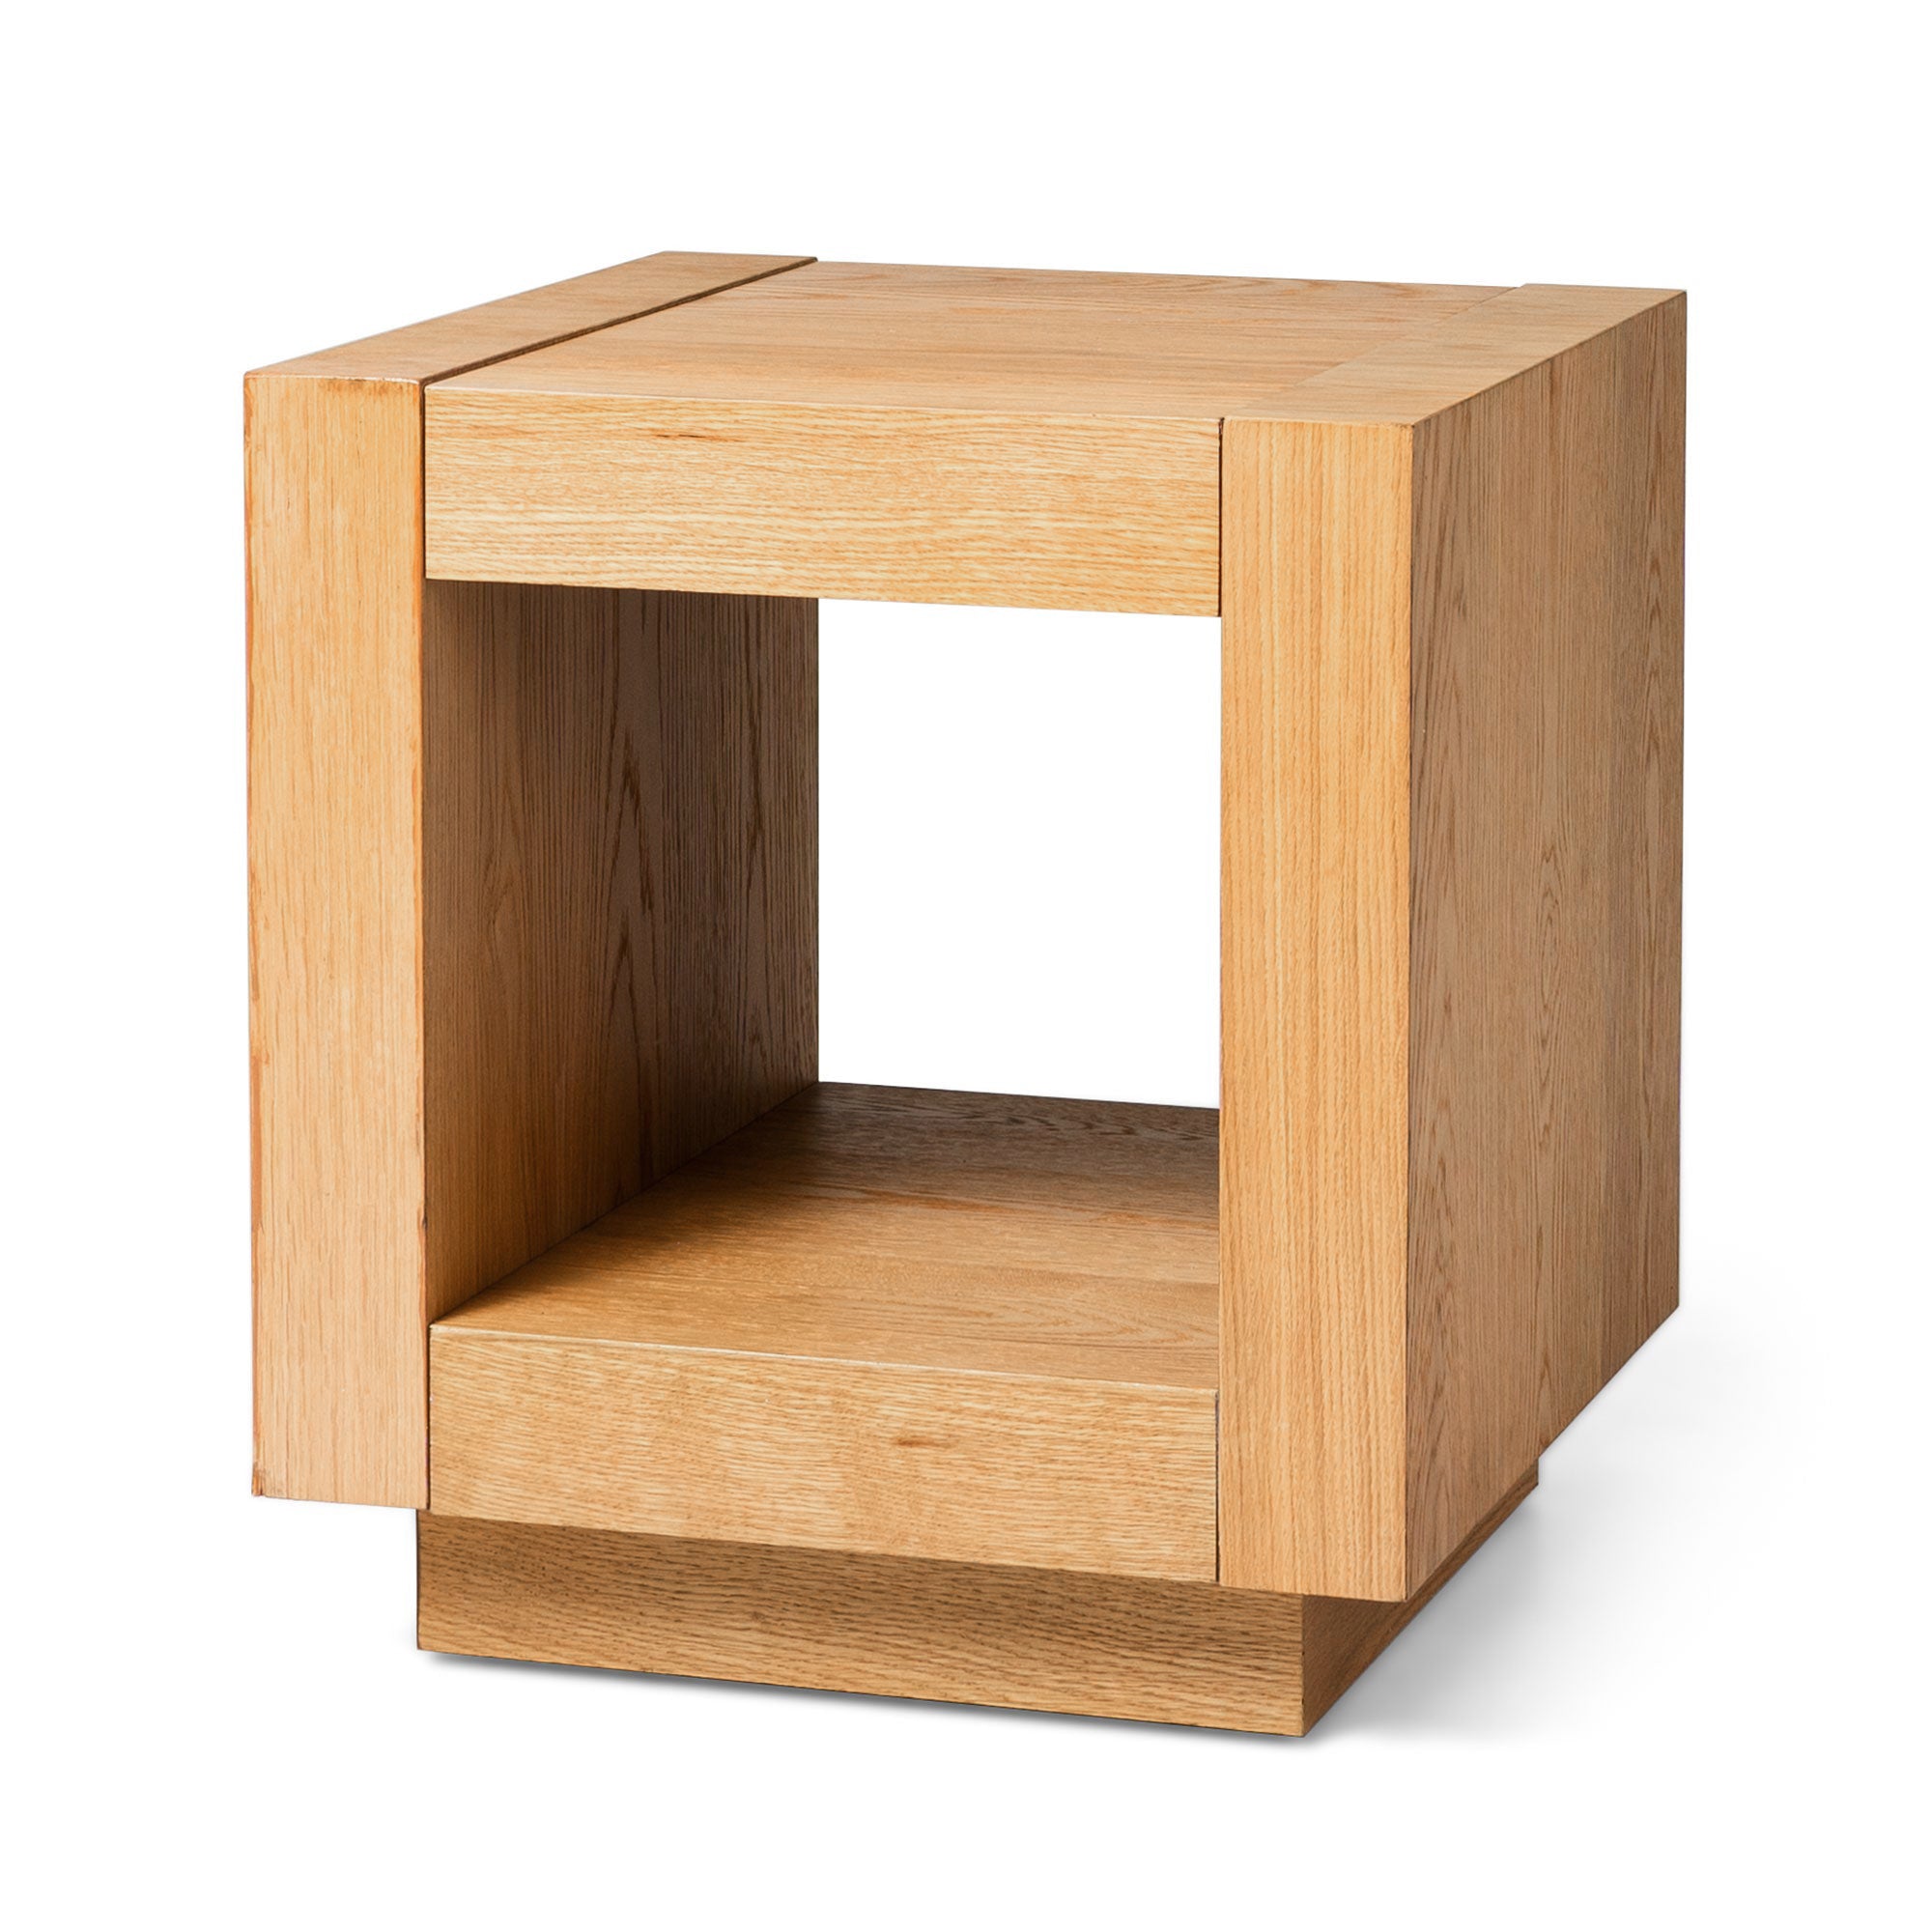 Artemis Contemporary Wooden Side Table in Refined Natural Finish